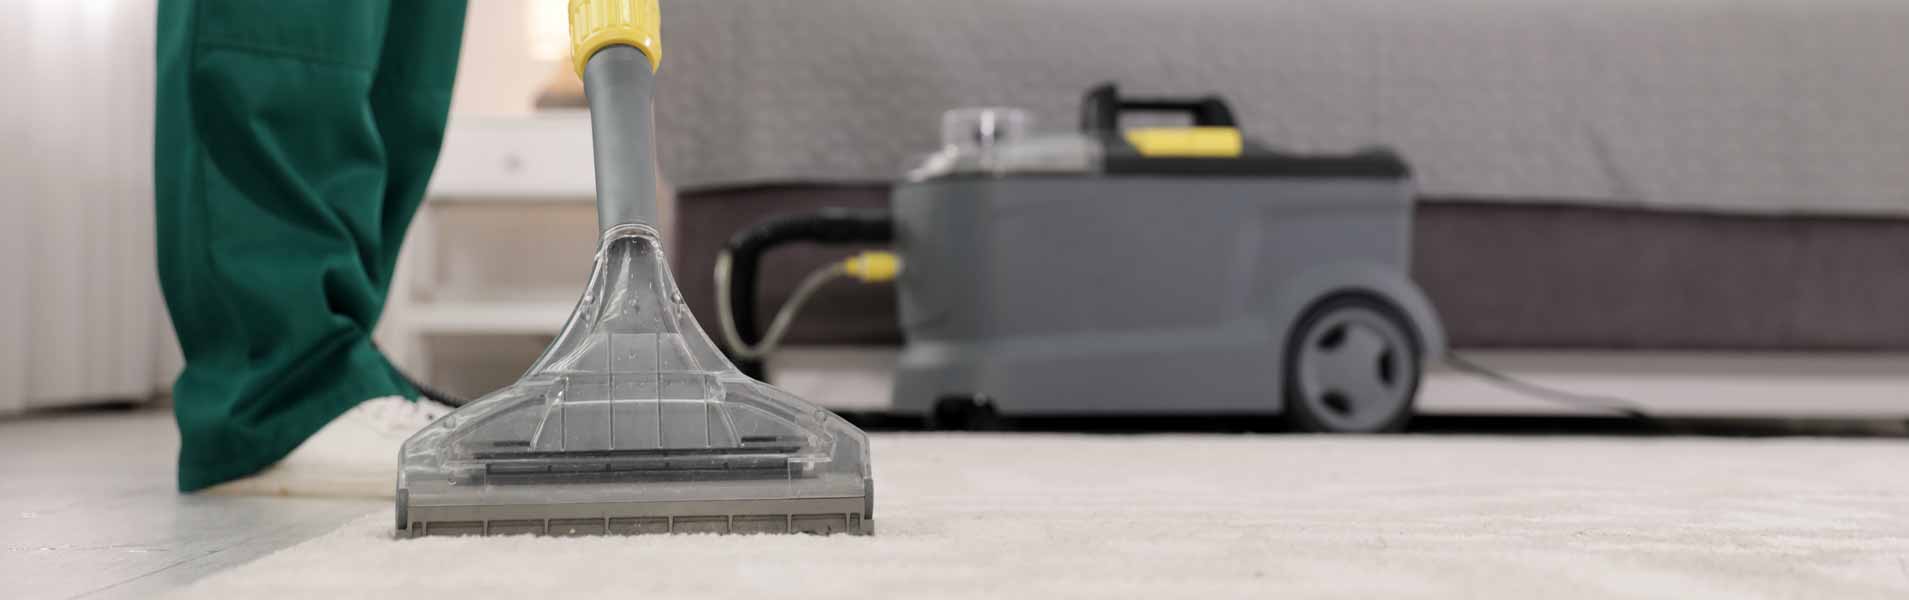 commercial carpet cleaning adelaide